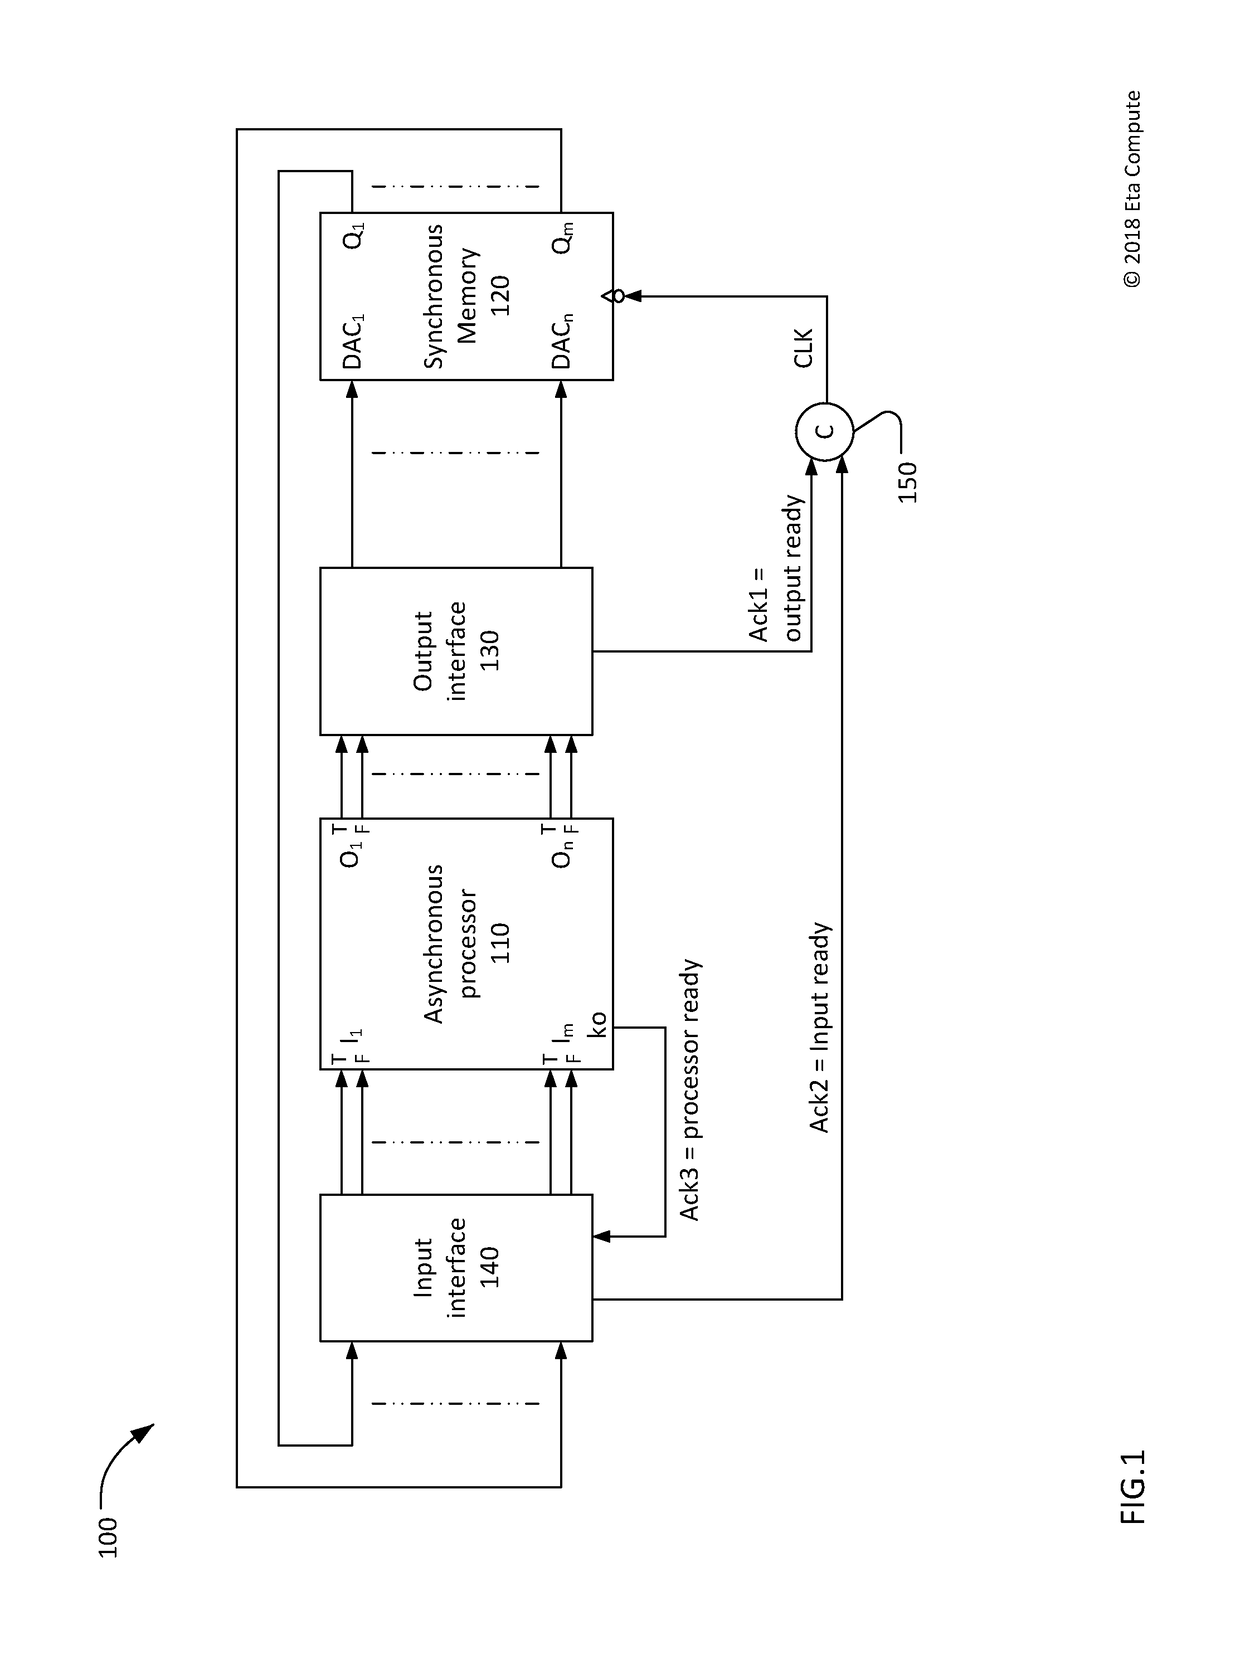 Interface from null convention logic to synchronous memory